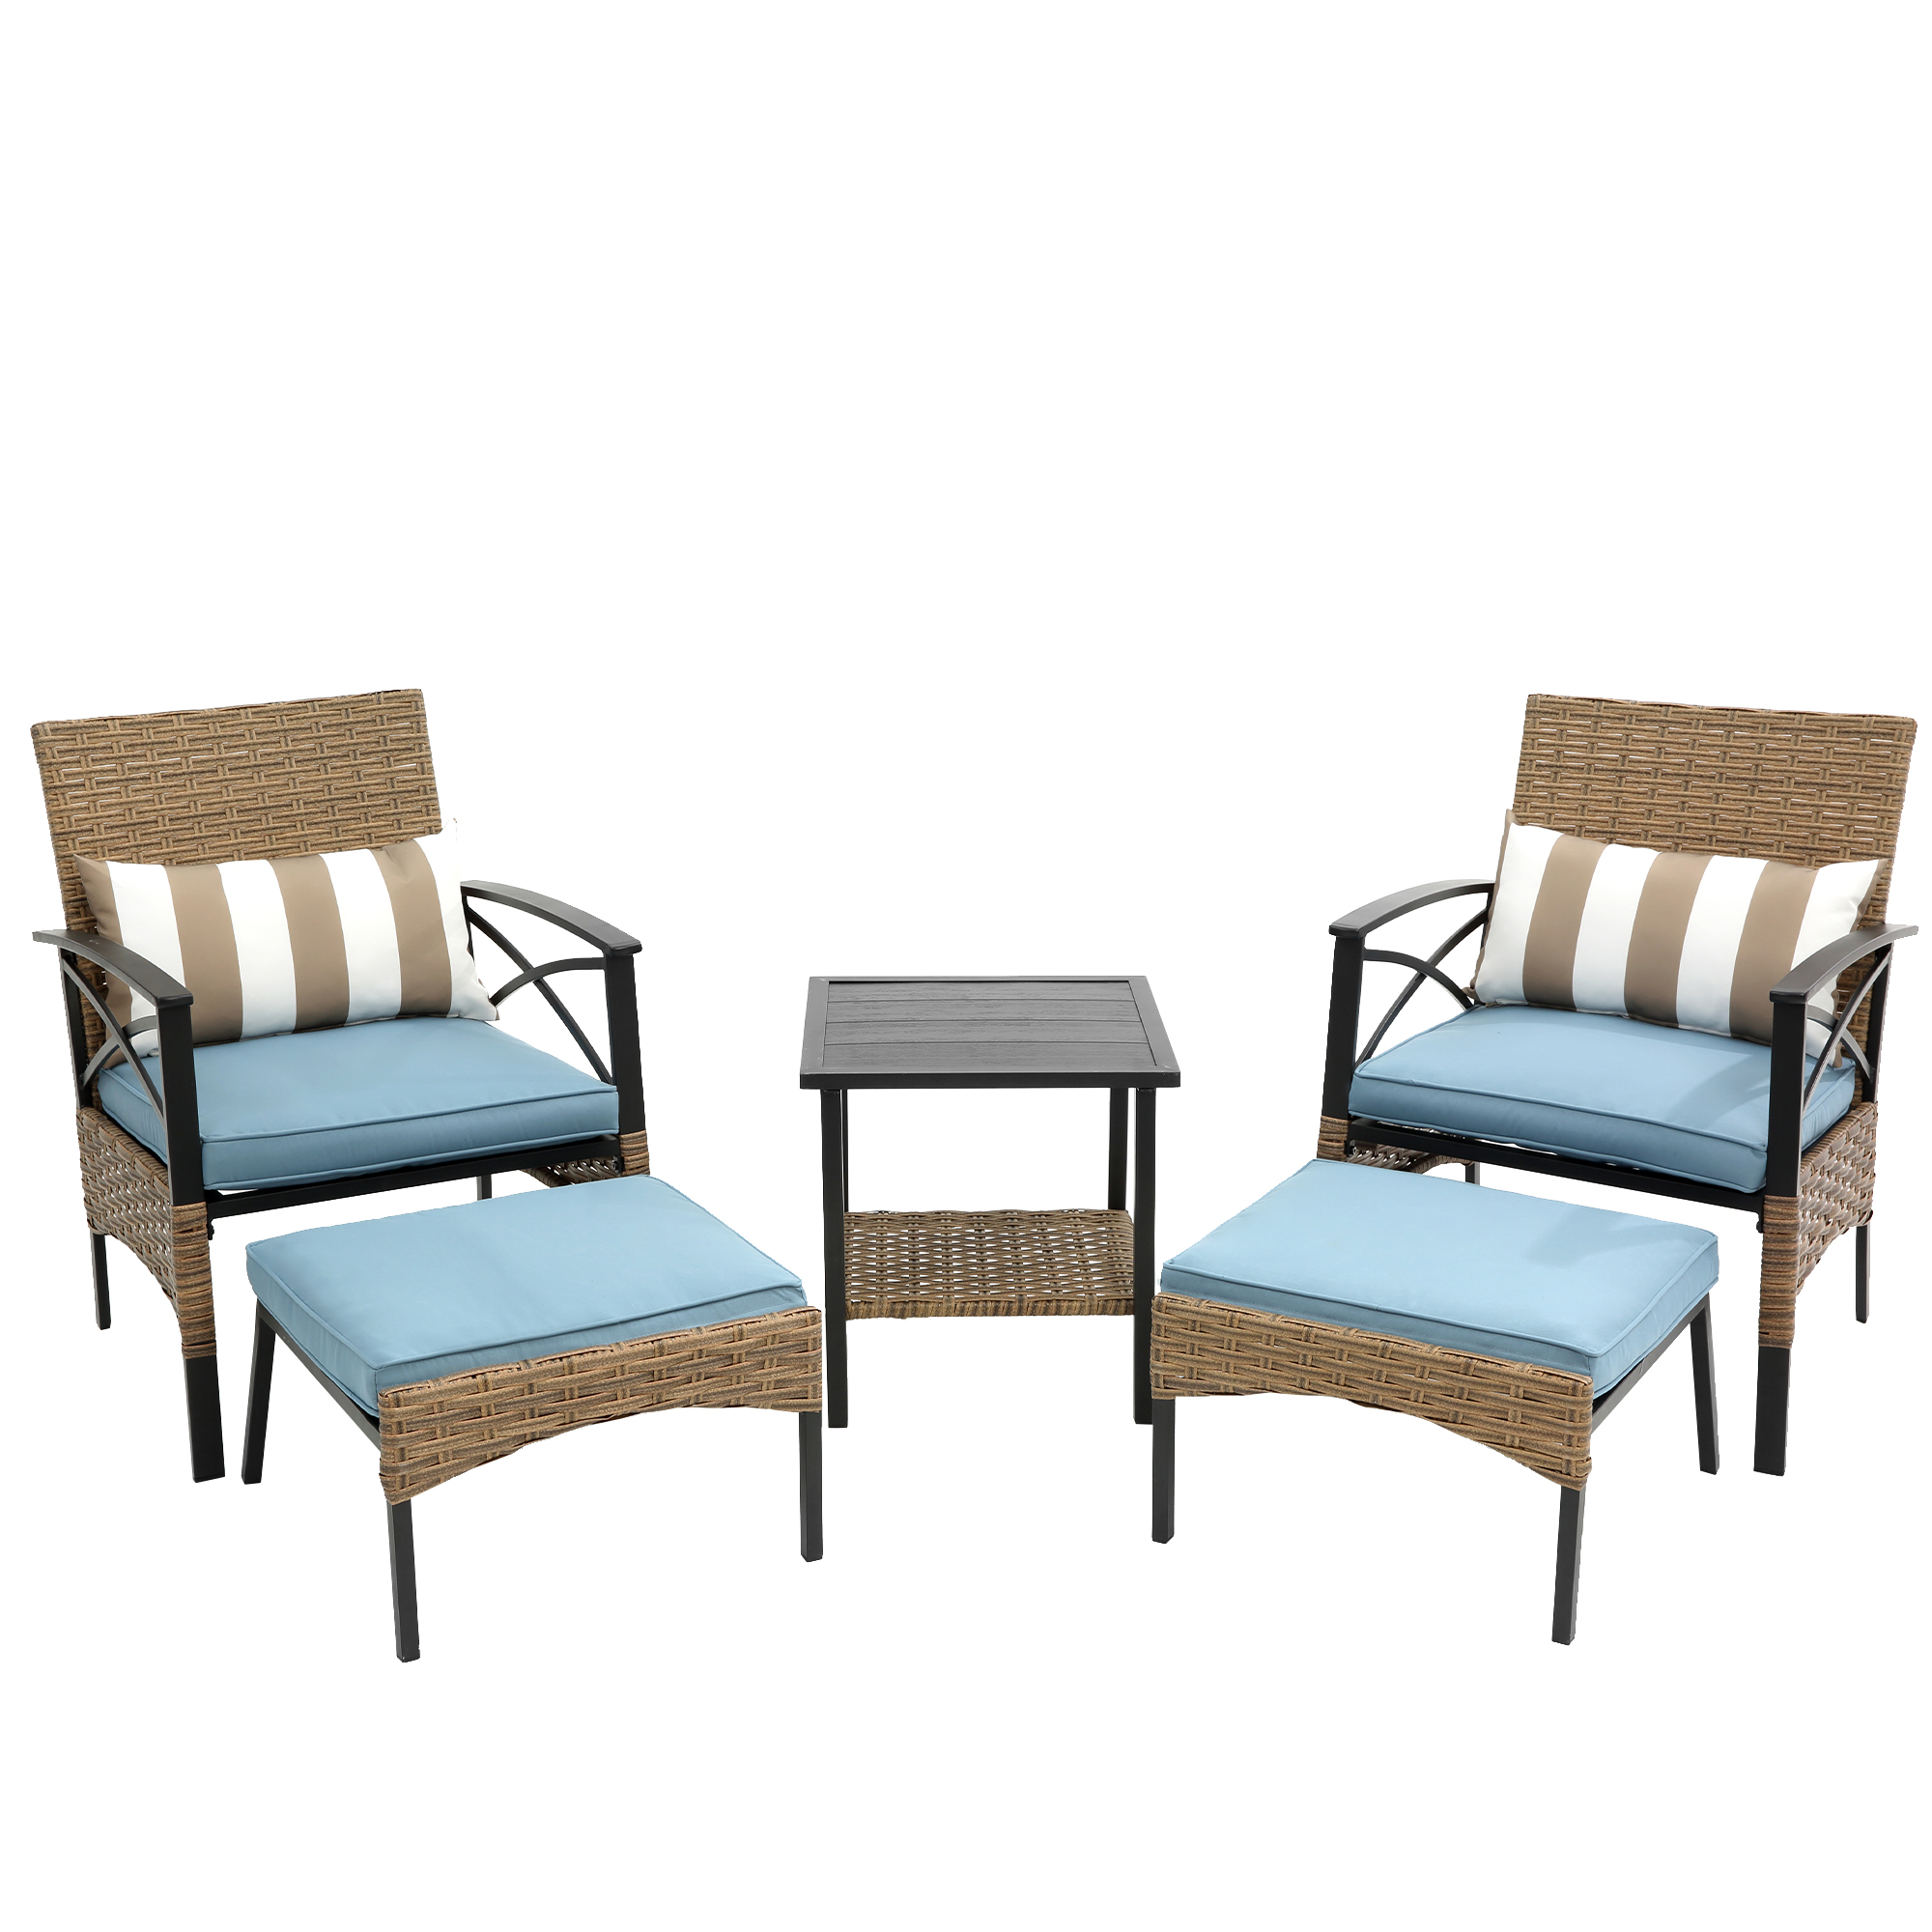 PE Brown Rattan Sofa Set of 5, Outdoor Patio Chair and Footstool Set with Cushions & Tea Table, All Weather Wicker Bistro Set, Poolside Conversation Furniture Set, Ideal for Garden Deck Coffee Bar - image 2 of 8